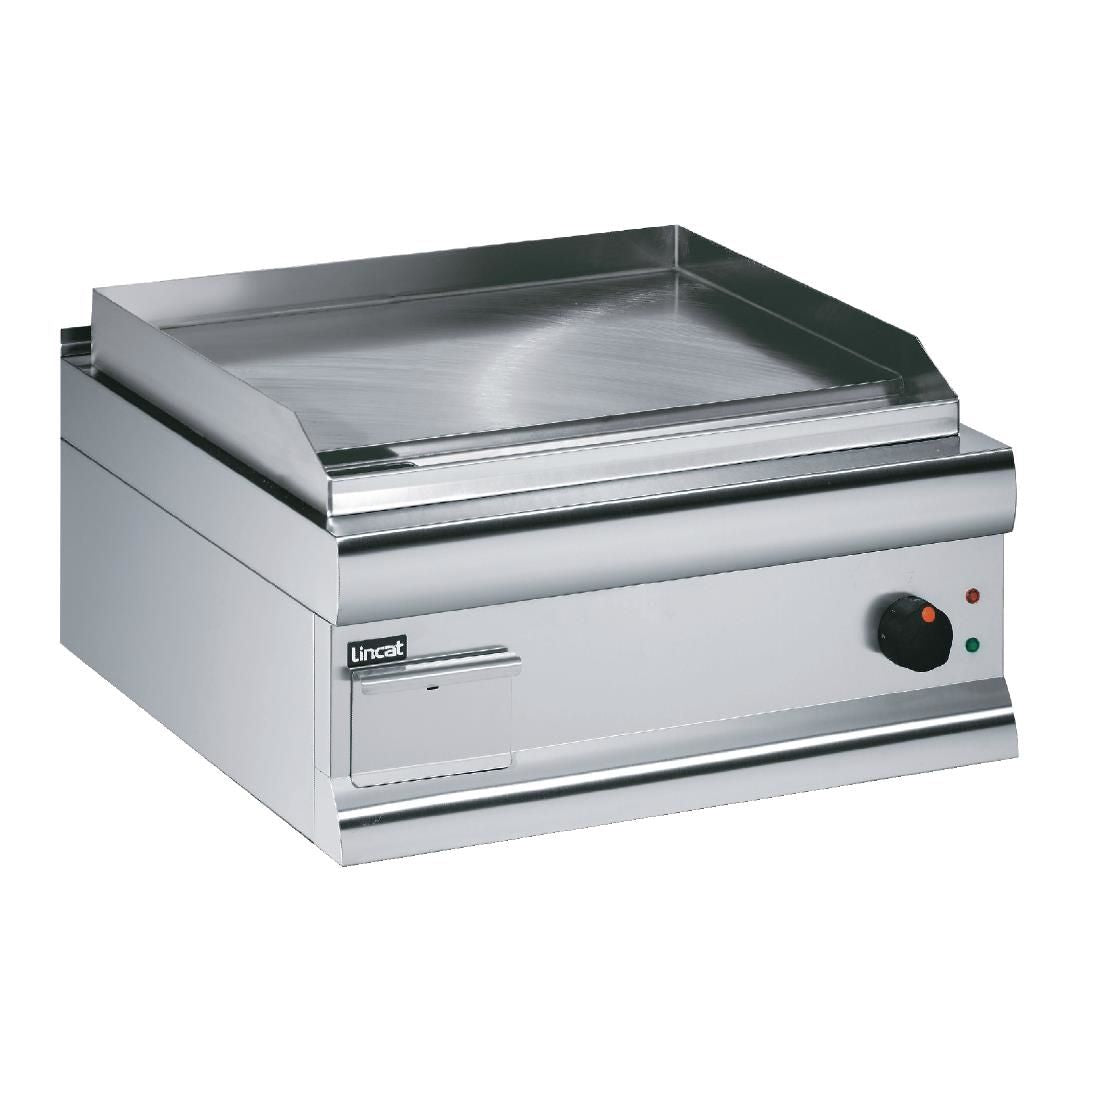 GS6 - Lincat Silverlink 600 Electric Counter-top Griddle - Steel Plate J950 JD Catering Equipment Solutions Ltd